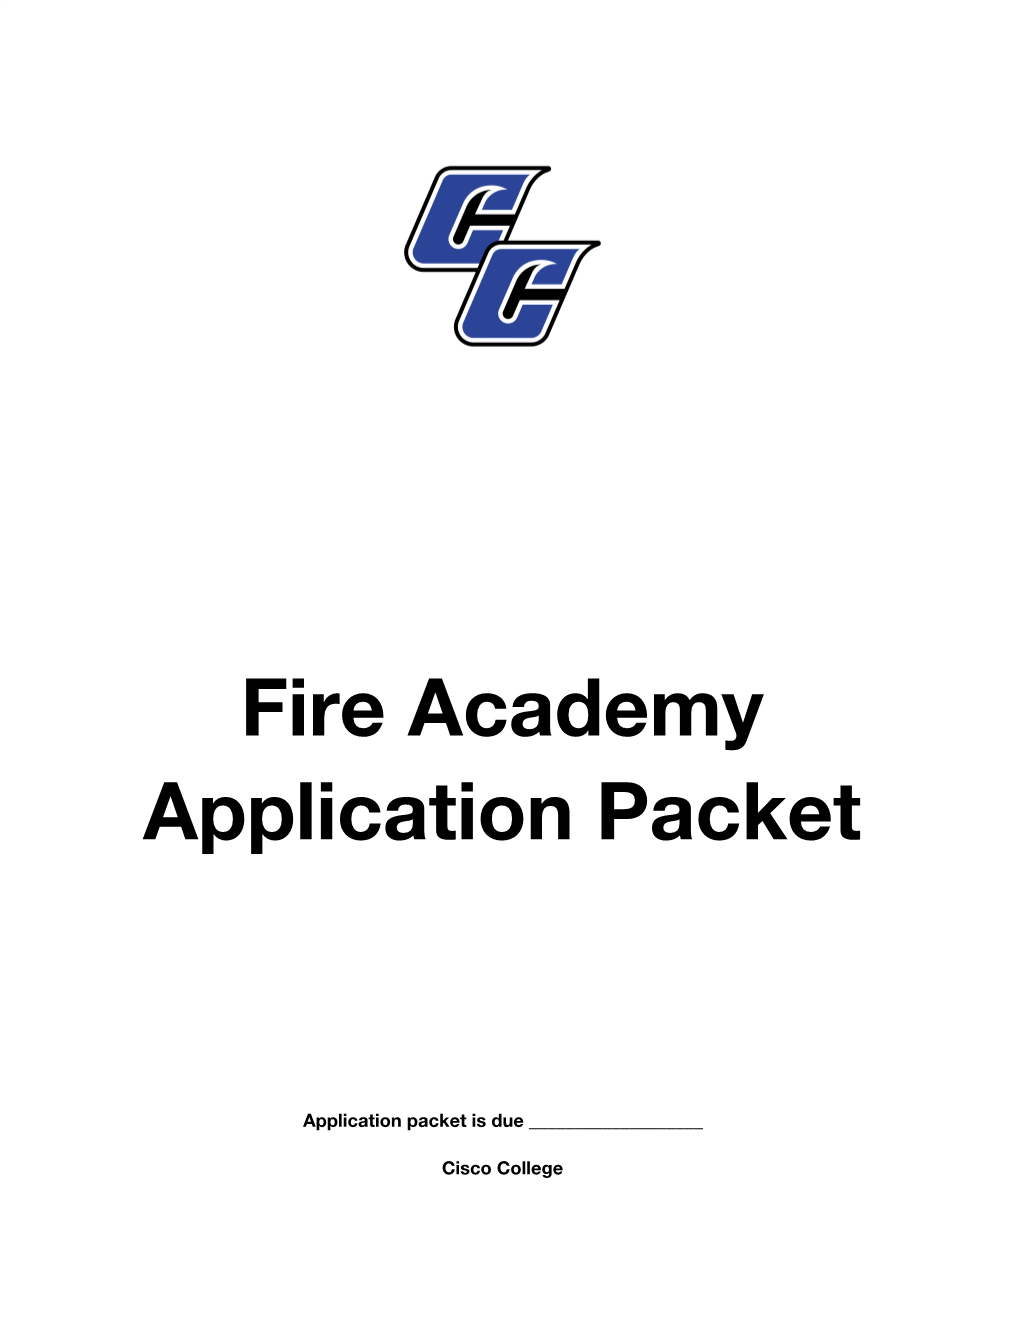 Fire Academy Application Packet